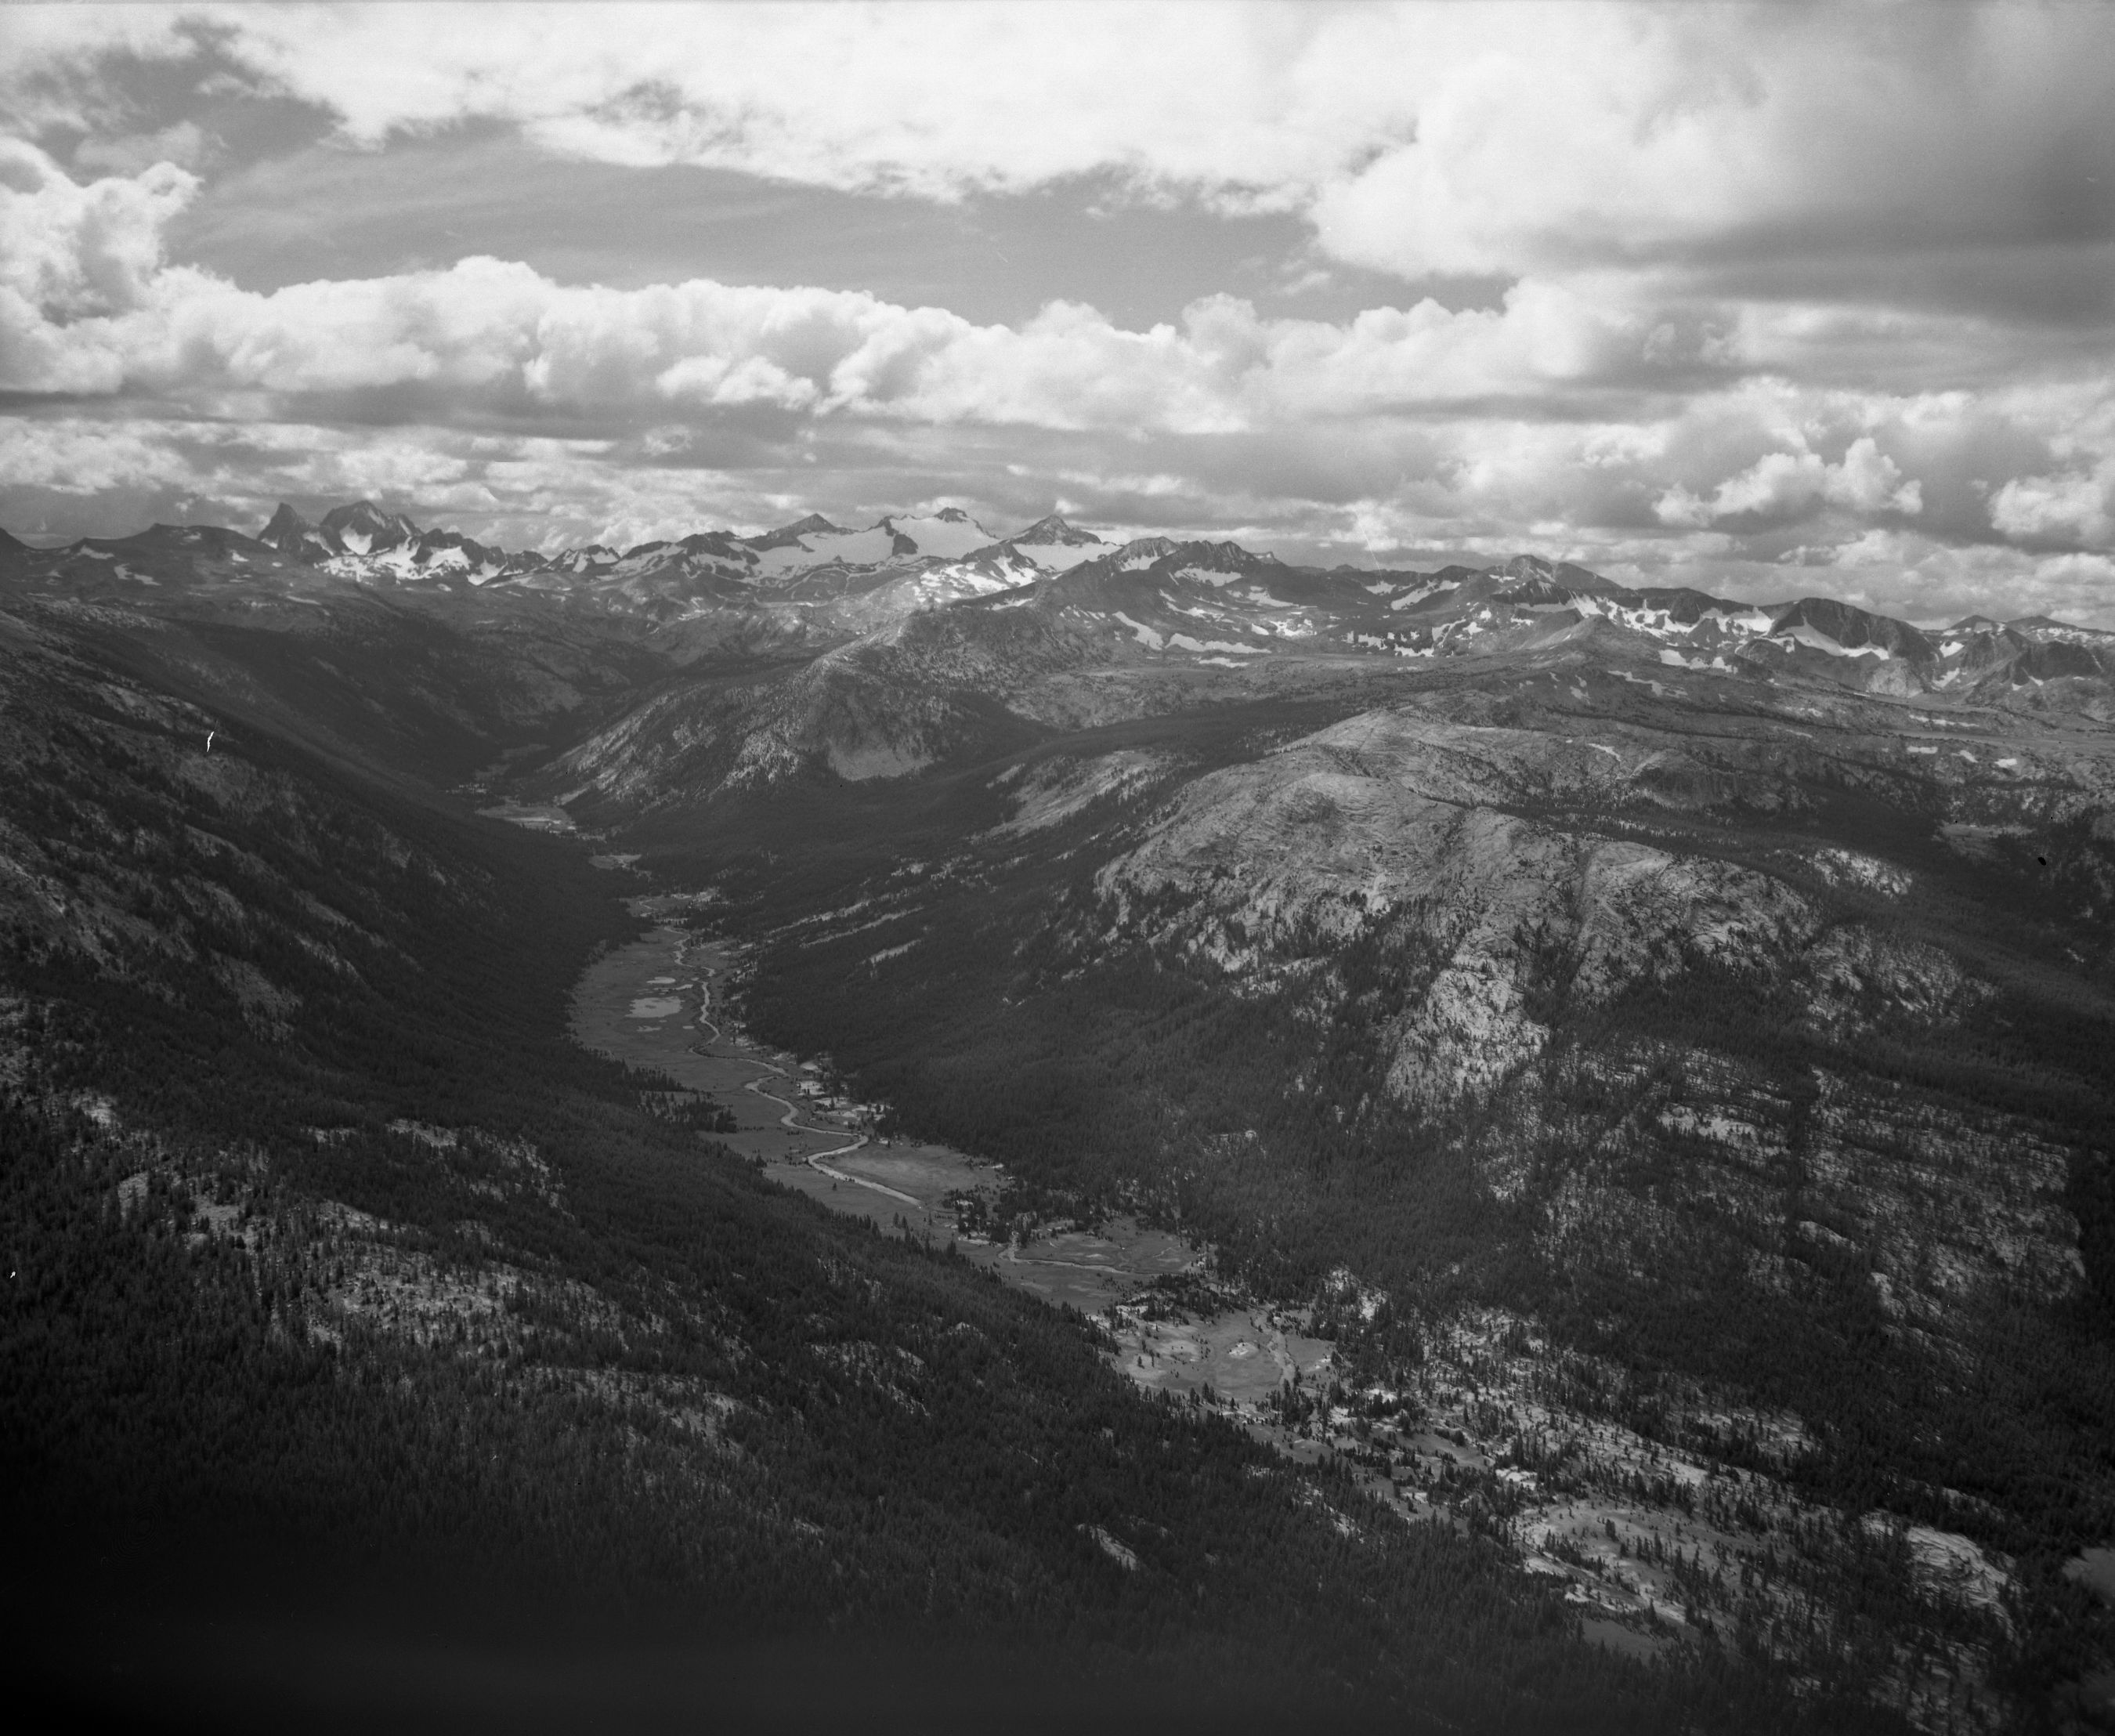 Aerial photograph of Lyell Canyon